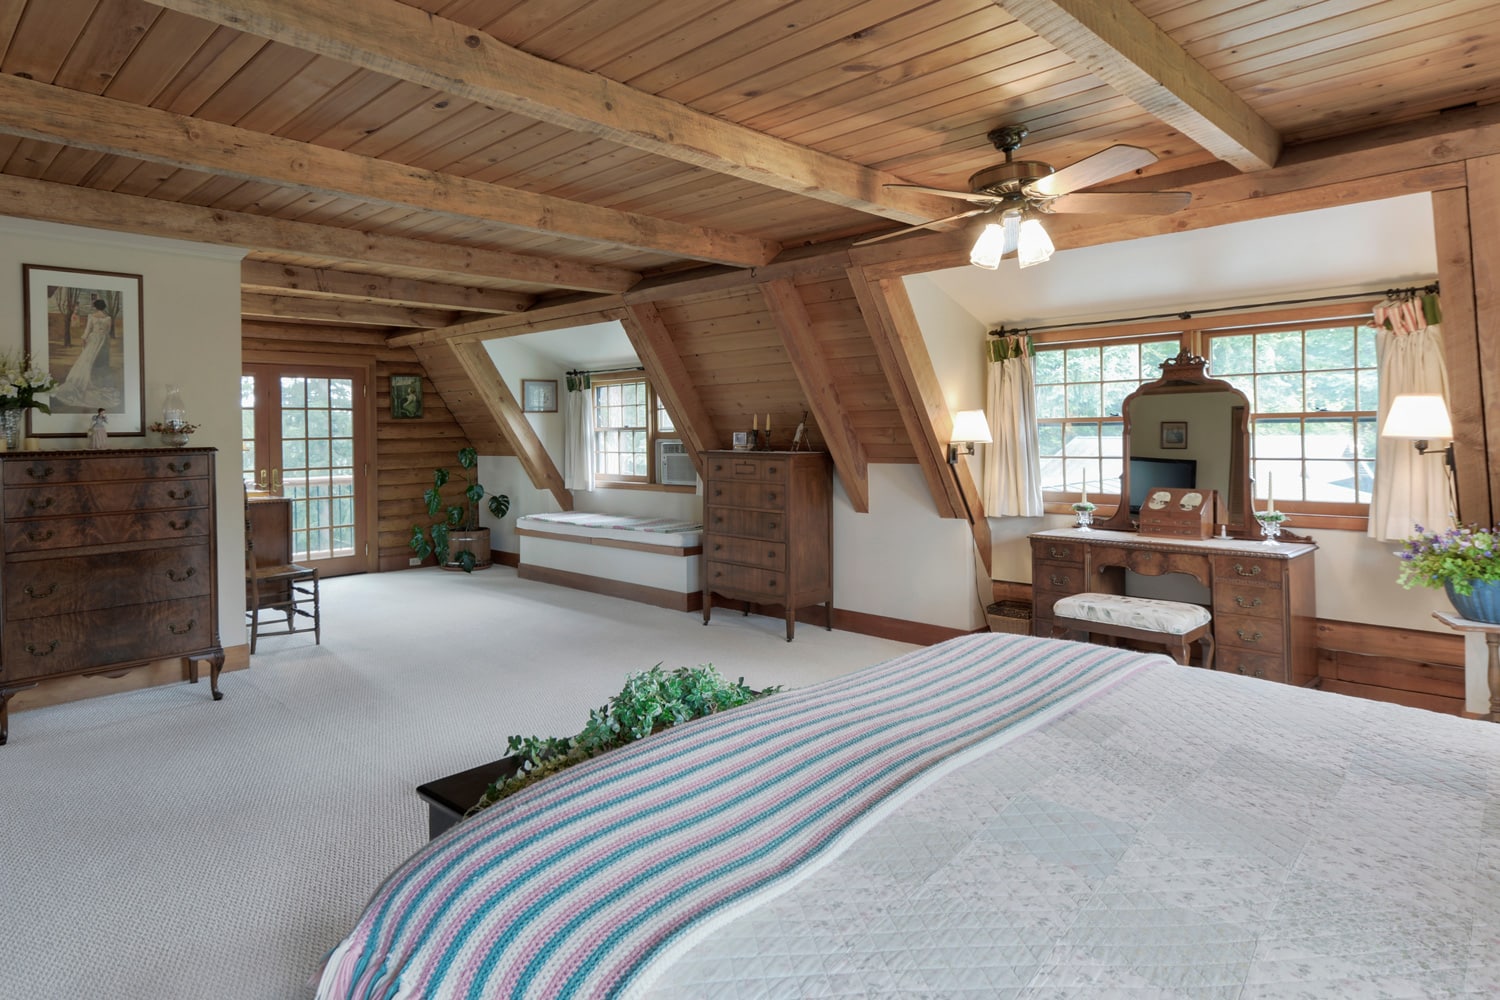 Rustic country log home bedroom interior